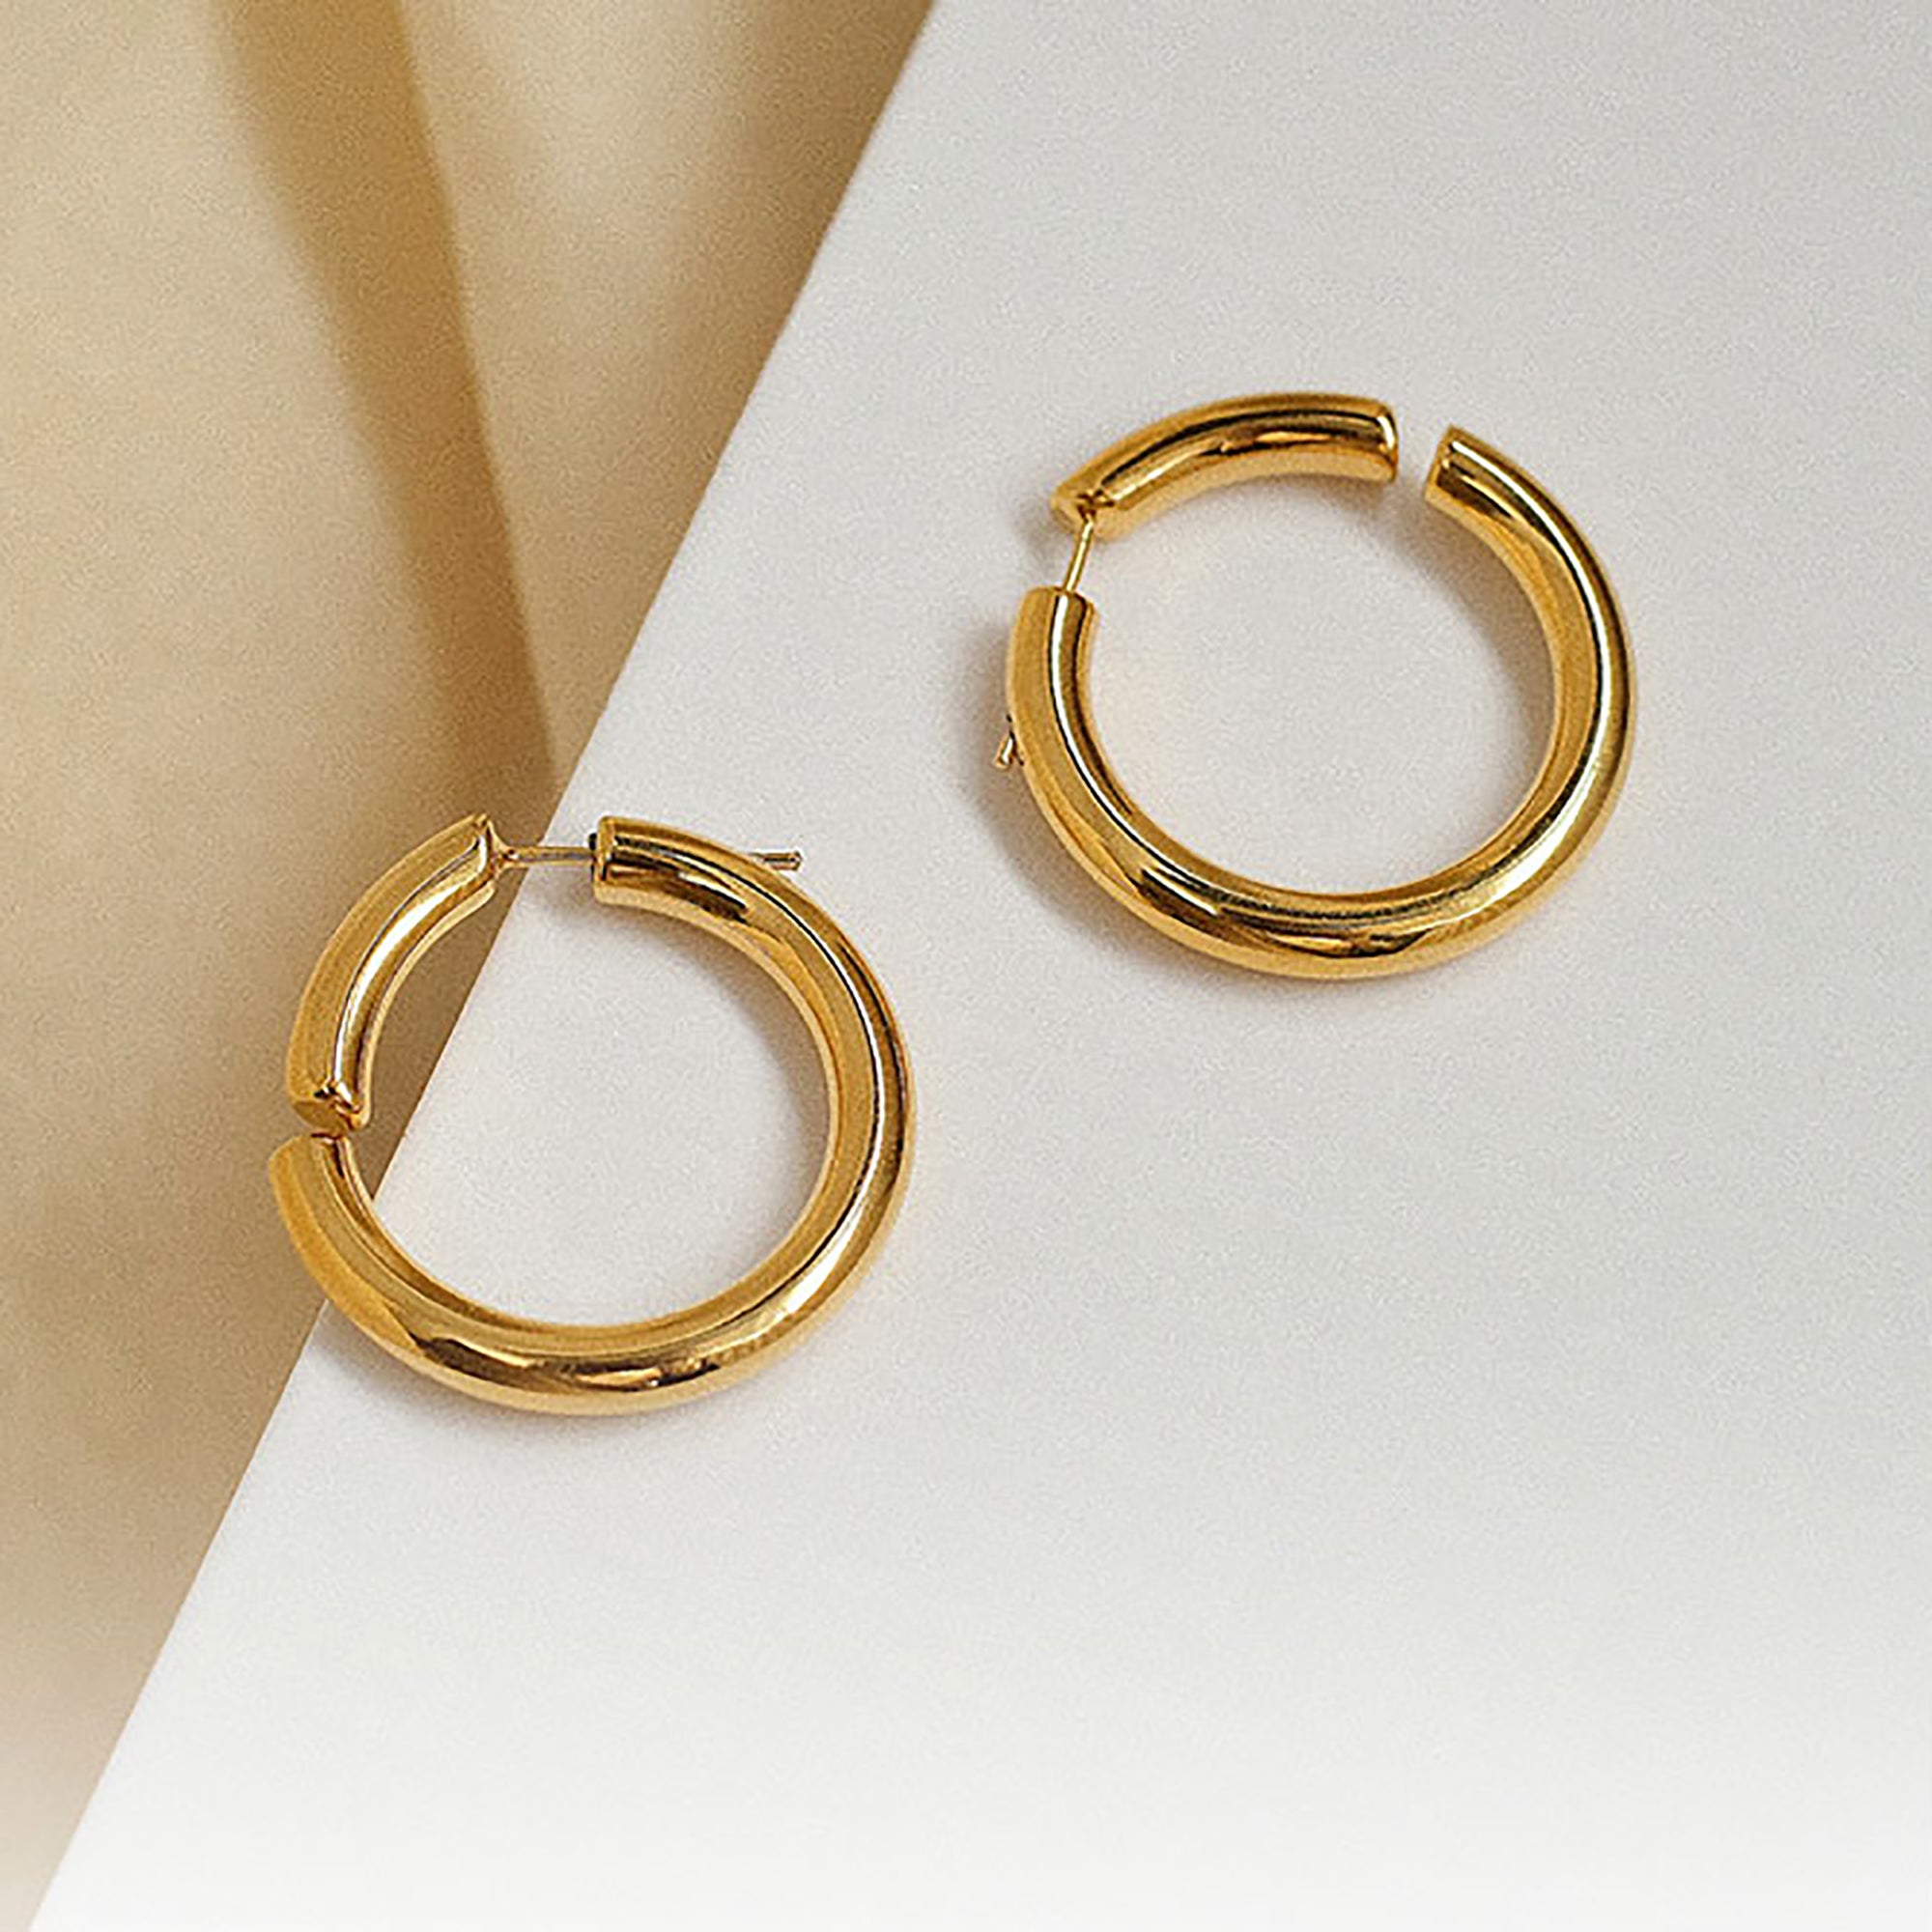 18K Gold Plated Deco Hoop Earrings Gift wedding influencer styling KOL / Youtuber / Celebrity / Fashion Icon